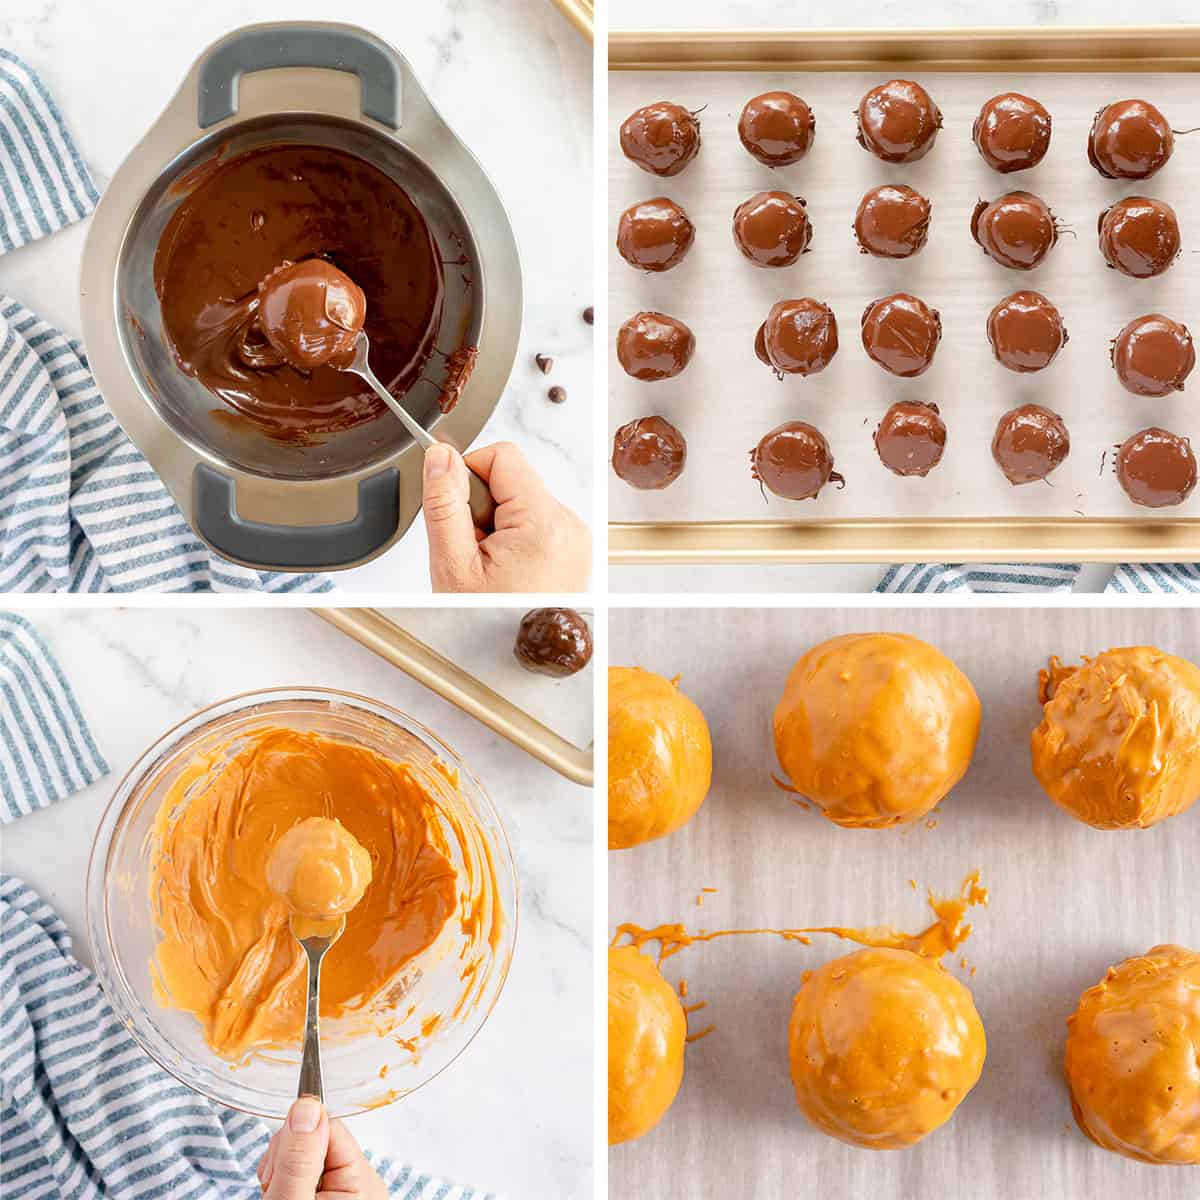 A four image collage -A bon bon is lifted from a pan of metled chocolate. Chocolate dipped bon bons on a baking sheet. butterscotch coated bon bon is lifted from a bowl. Butterscotch bon bons on a baking sheet.